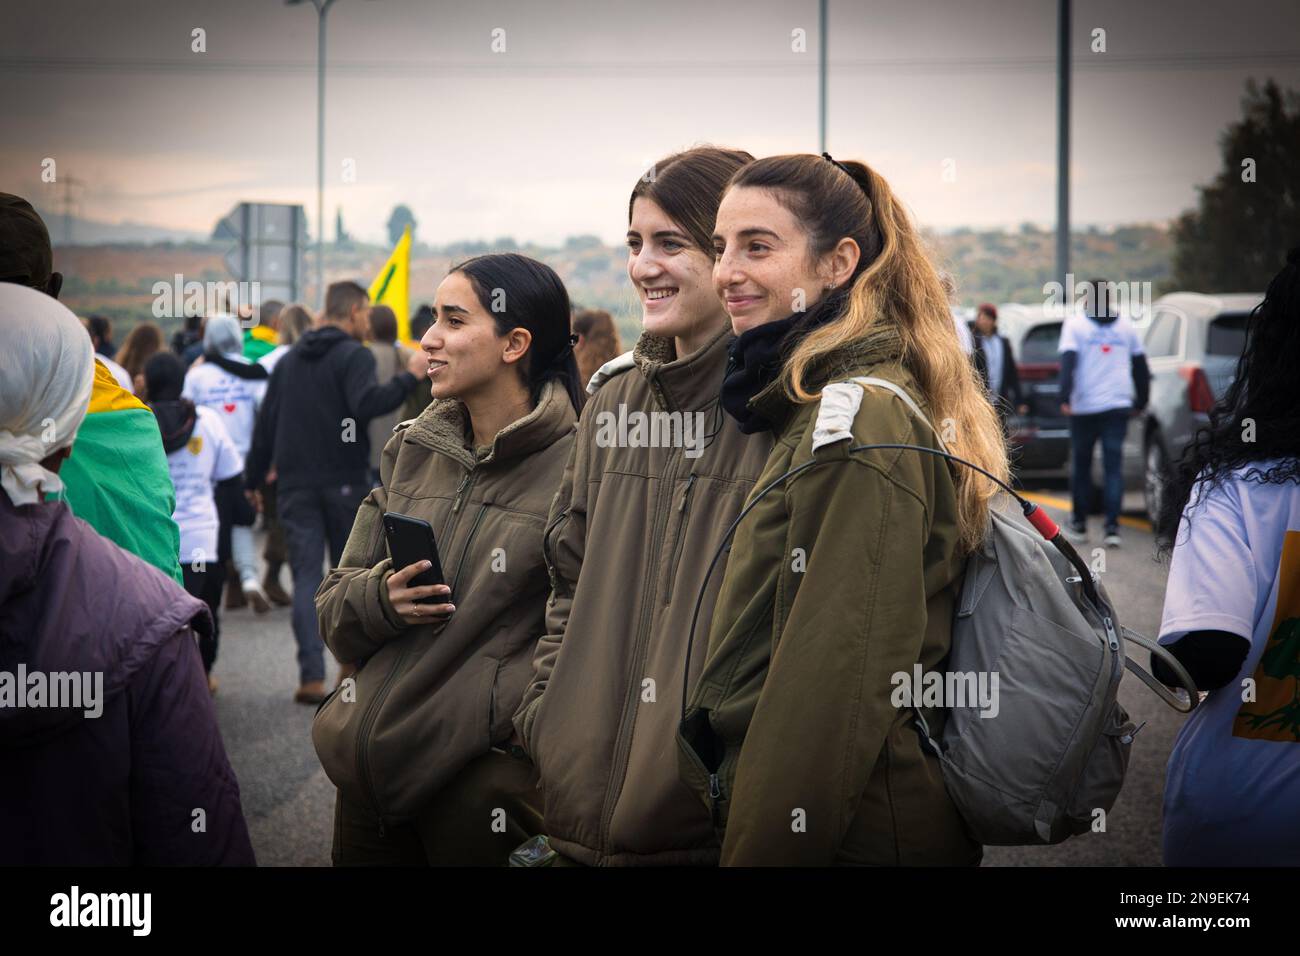 The female soldiers and citizens marching in the city of Golani Junction, Israel Stock Photo